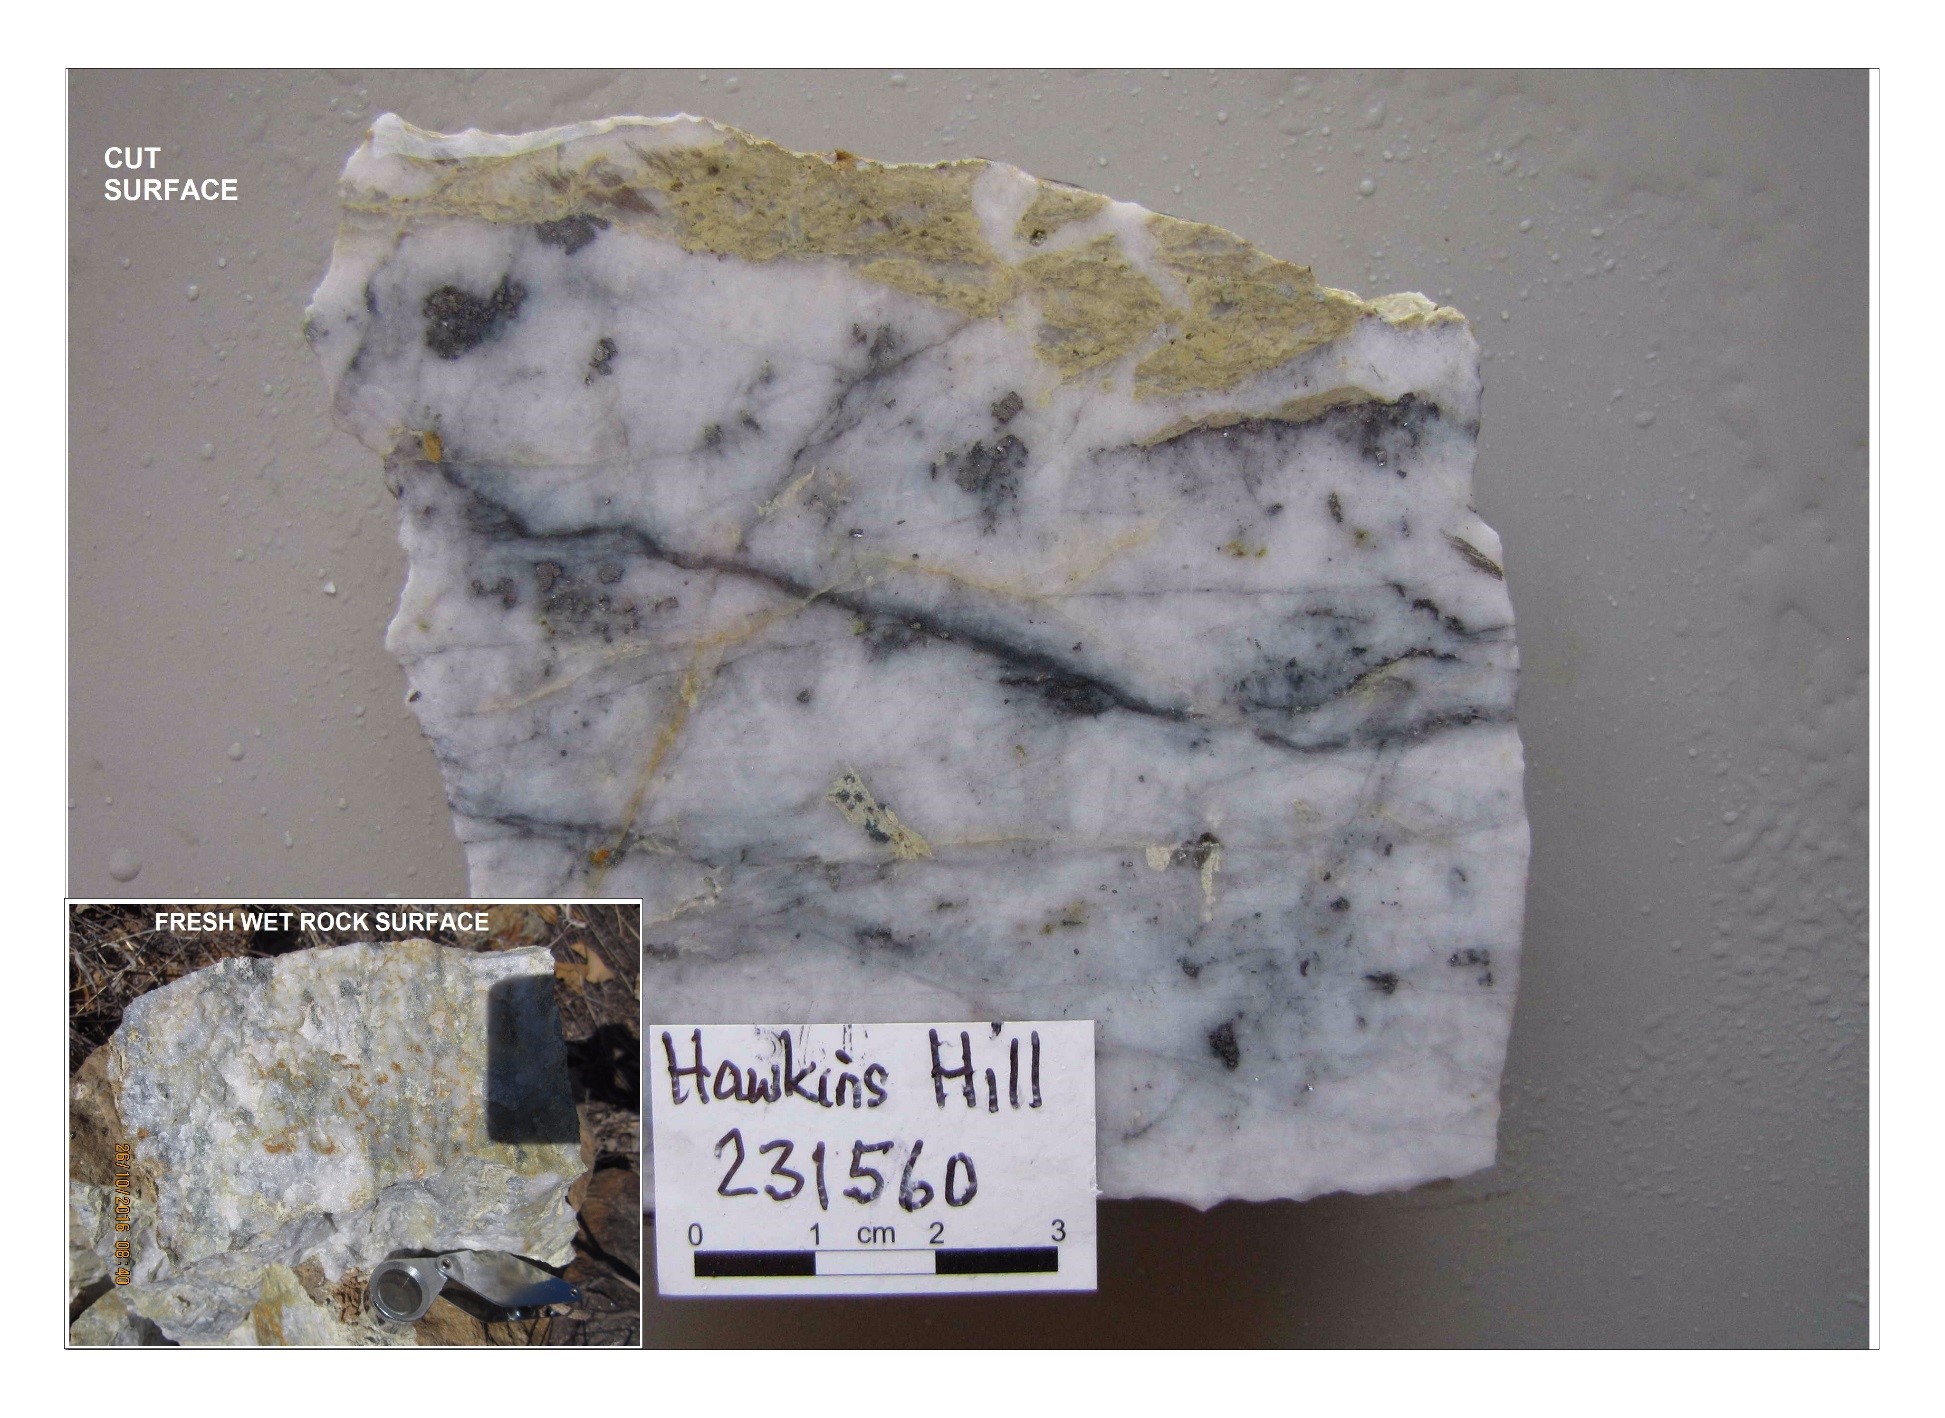 PLATE 21 : Photograph of sample of ore from Hawkins Hill, Durham Camp, Georgetown. Insert shows rough , coarsely crystalline, buck quartz with little textural variation on fresh rock sample compared to the same specimen cut with a diamond saw producing a polished face revealing a complex, multi-phase history of quartz and sulphide development along fractures and in veins.